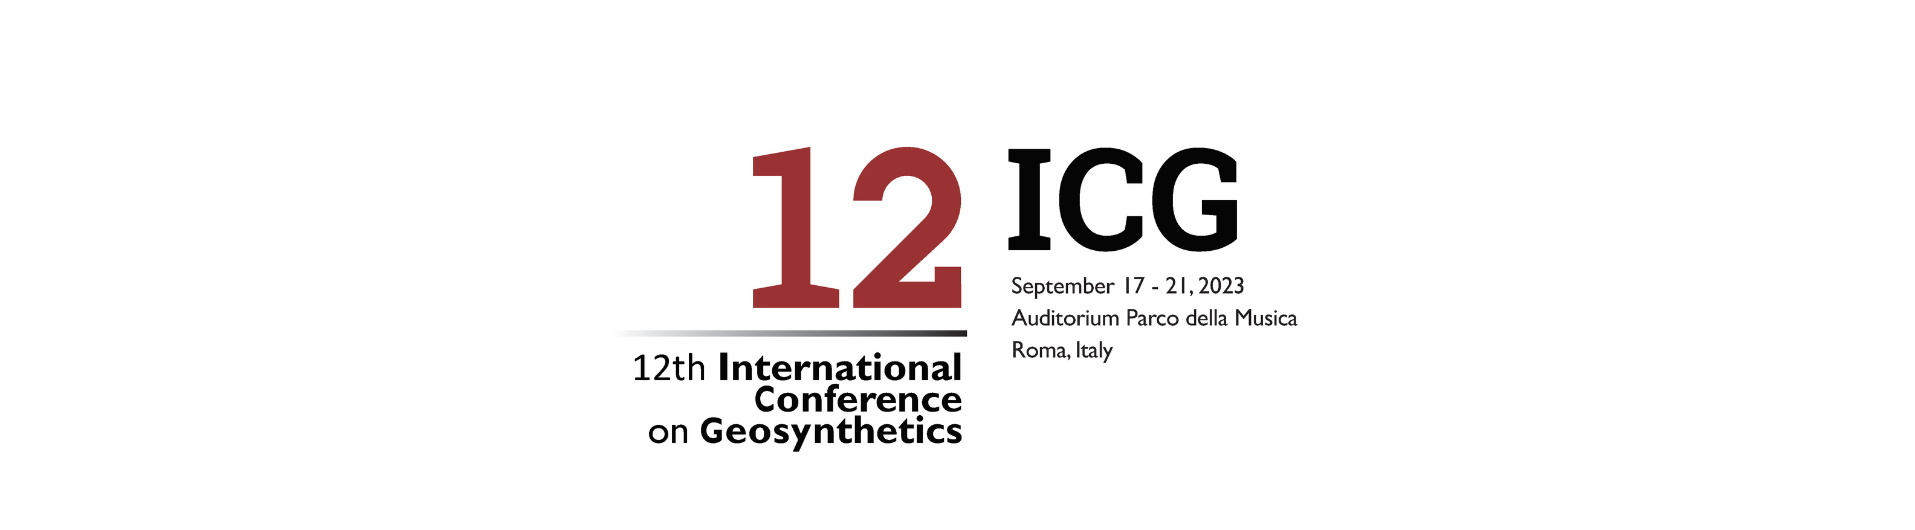 12th International Conference on Geosynthetics